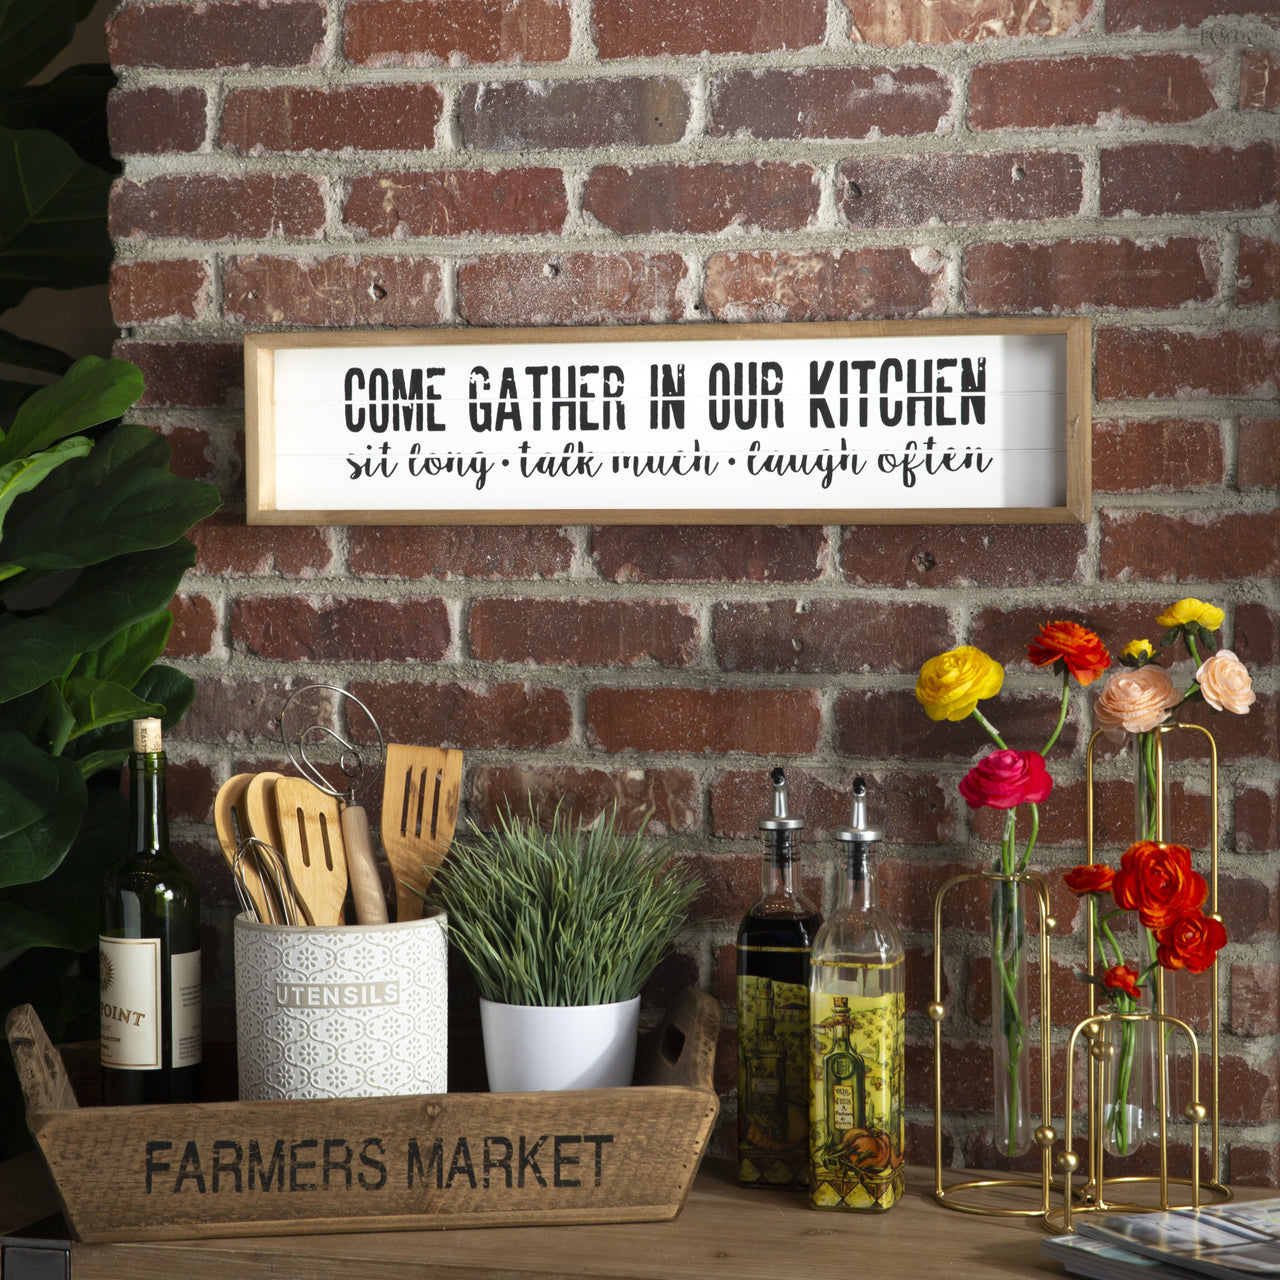 Gather in Our Kitchen Sign